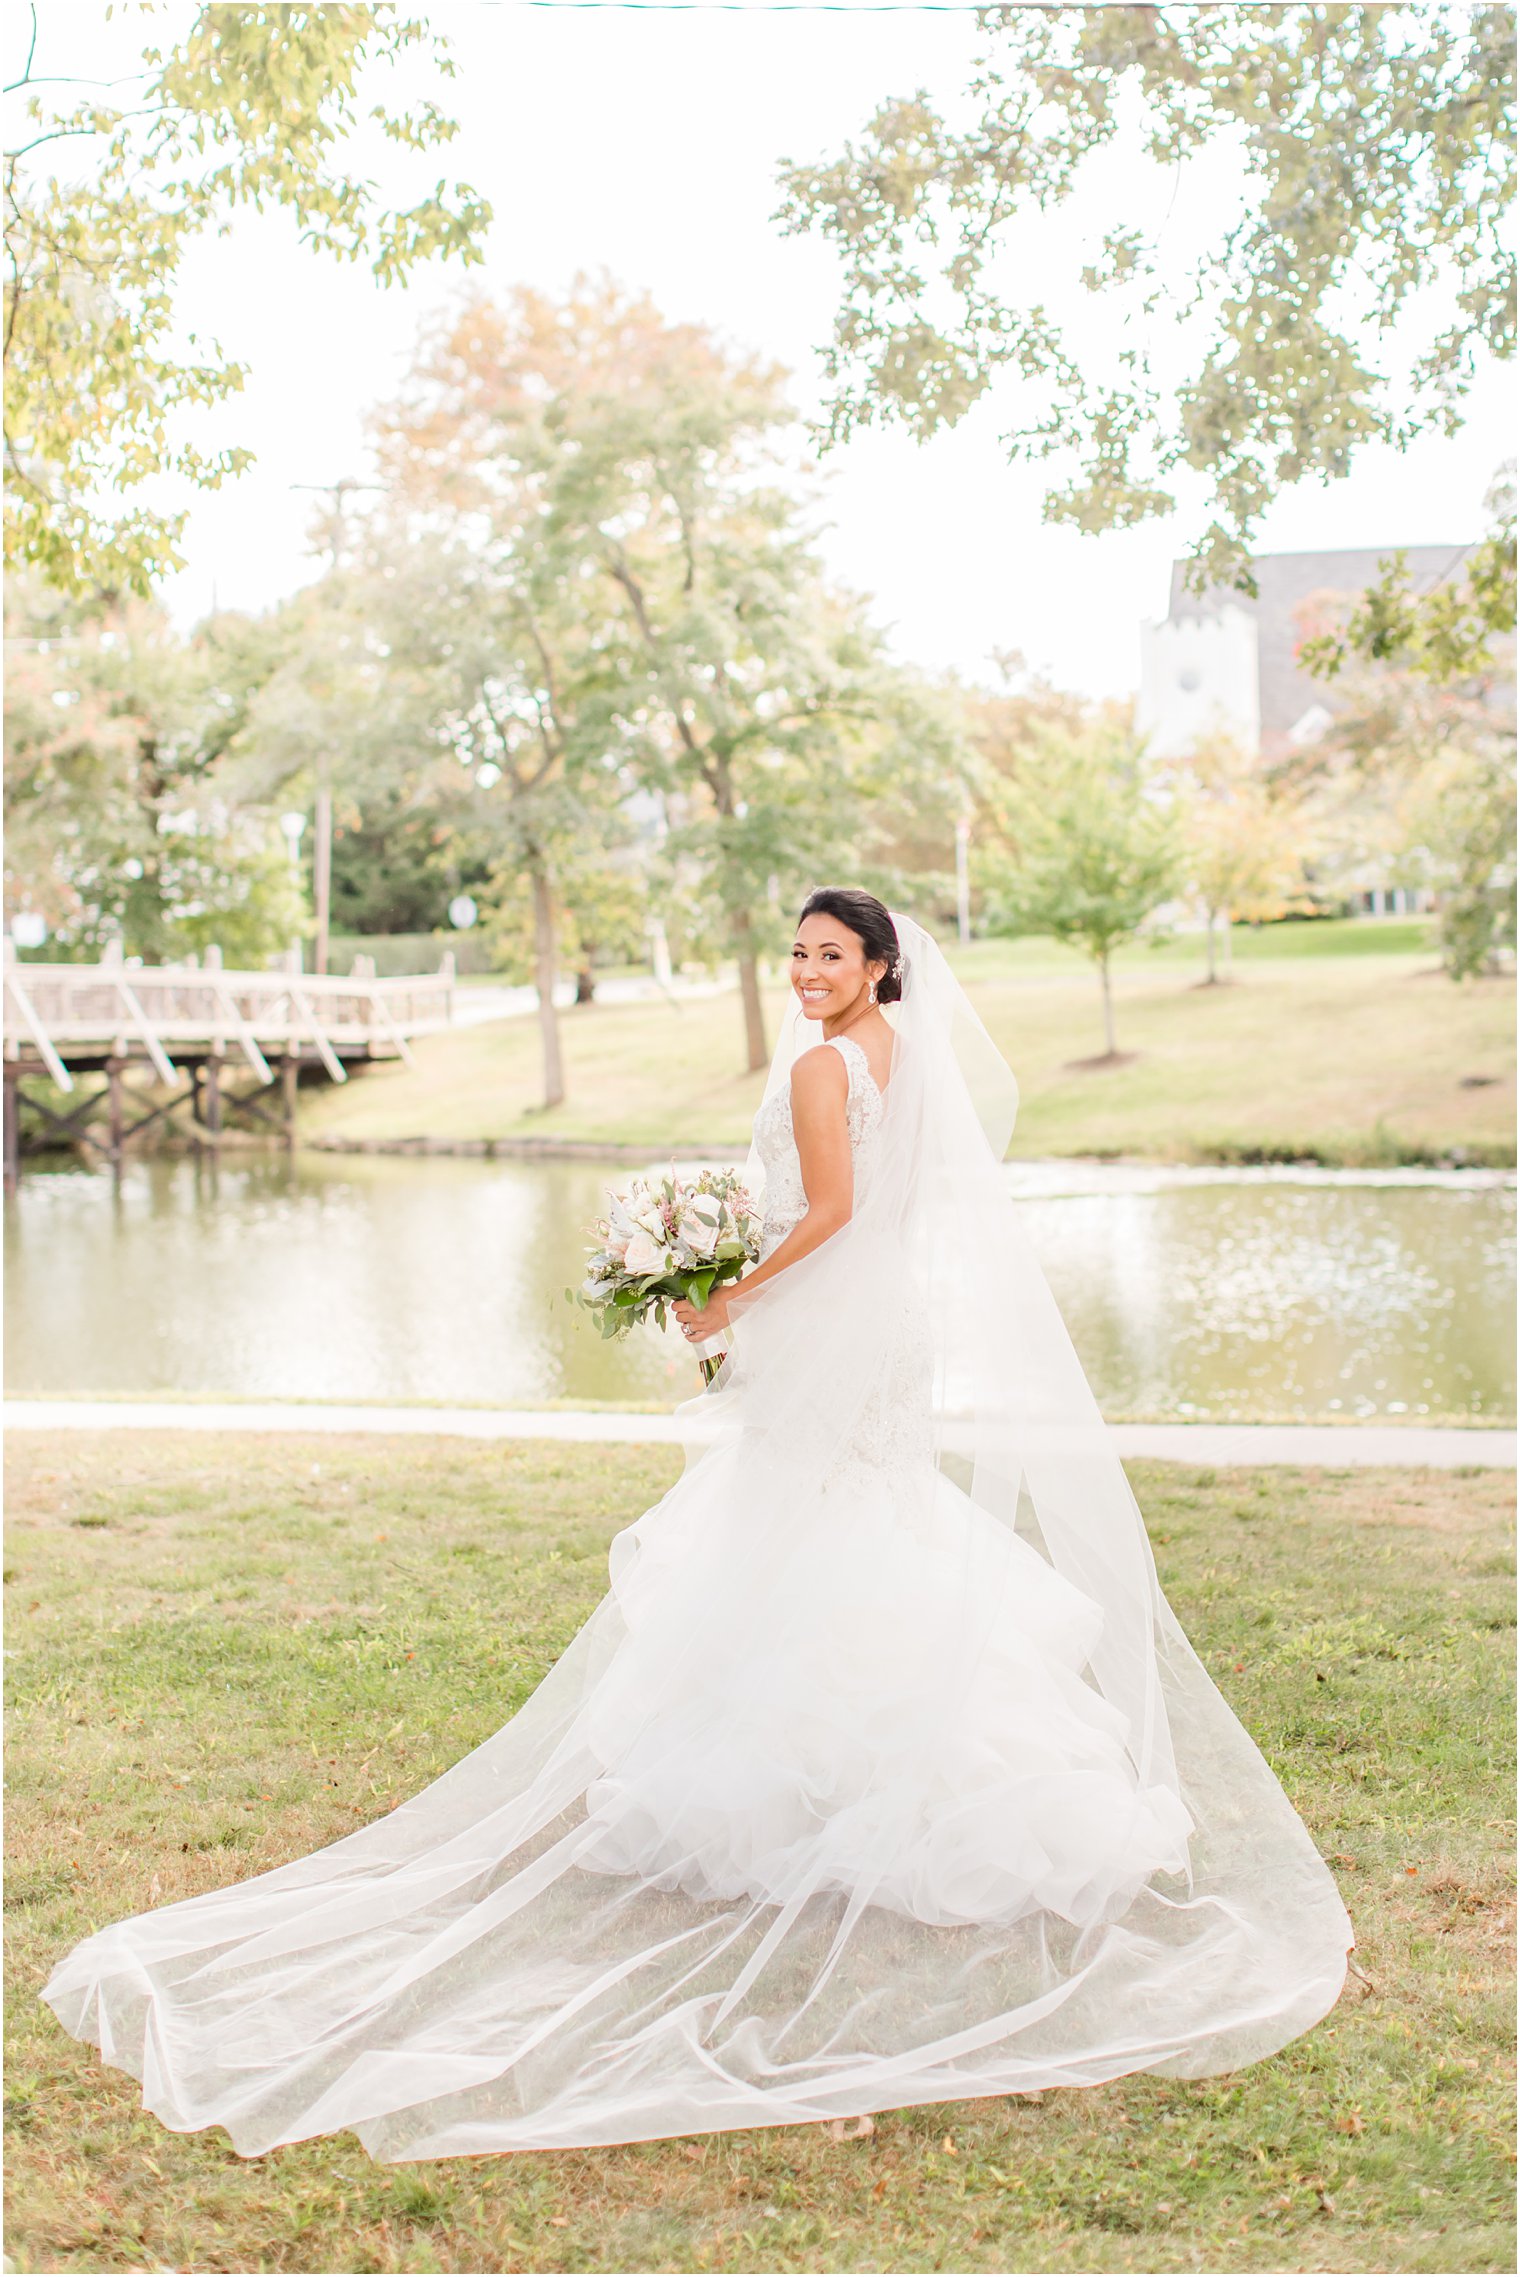 bride poses with veil behind her looking over shoulder in park